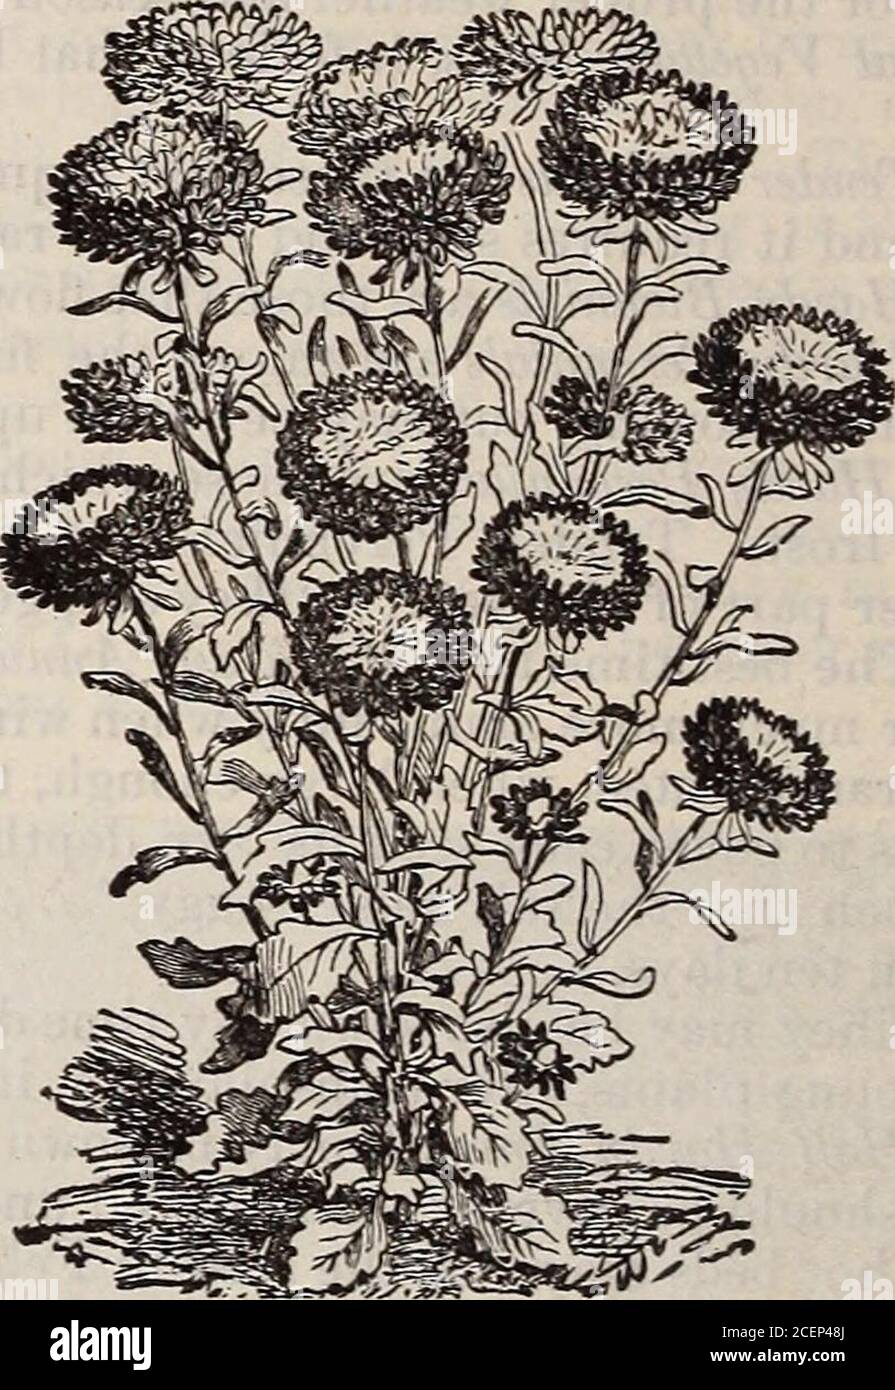 . Catalogue of seeds, agricultural & horticultural supplies and guide for the garden, field & farm. Ageratum Mexicanum (Imperial Dwarf.) Cocardeau. Anagallis, mixed, various colors £ The Pimpernel; free blooming, attractive plants for borders. Arg*emone, mixed, white or yellow 2 The Mexican Poppy. Very showy. Aster. Dwarf Pyramidal Bouquet, mixed f Dwarf Chrysanthemum flowered, mixed , 1 Quilled German, mixed 1J Globe flowered, mixed l| Victoria, mixed l| ,: Truffauts Peony flowered perfection, mixed l| Cocardeau, or Crown, (see cut), with white centers, mixed H Giant Emperor. Flowers 3 inches Stock Photo